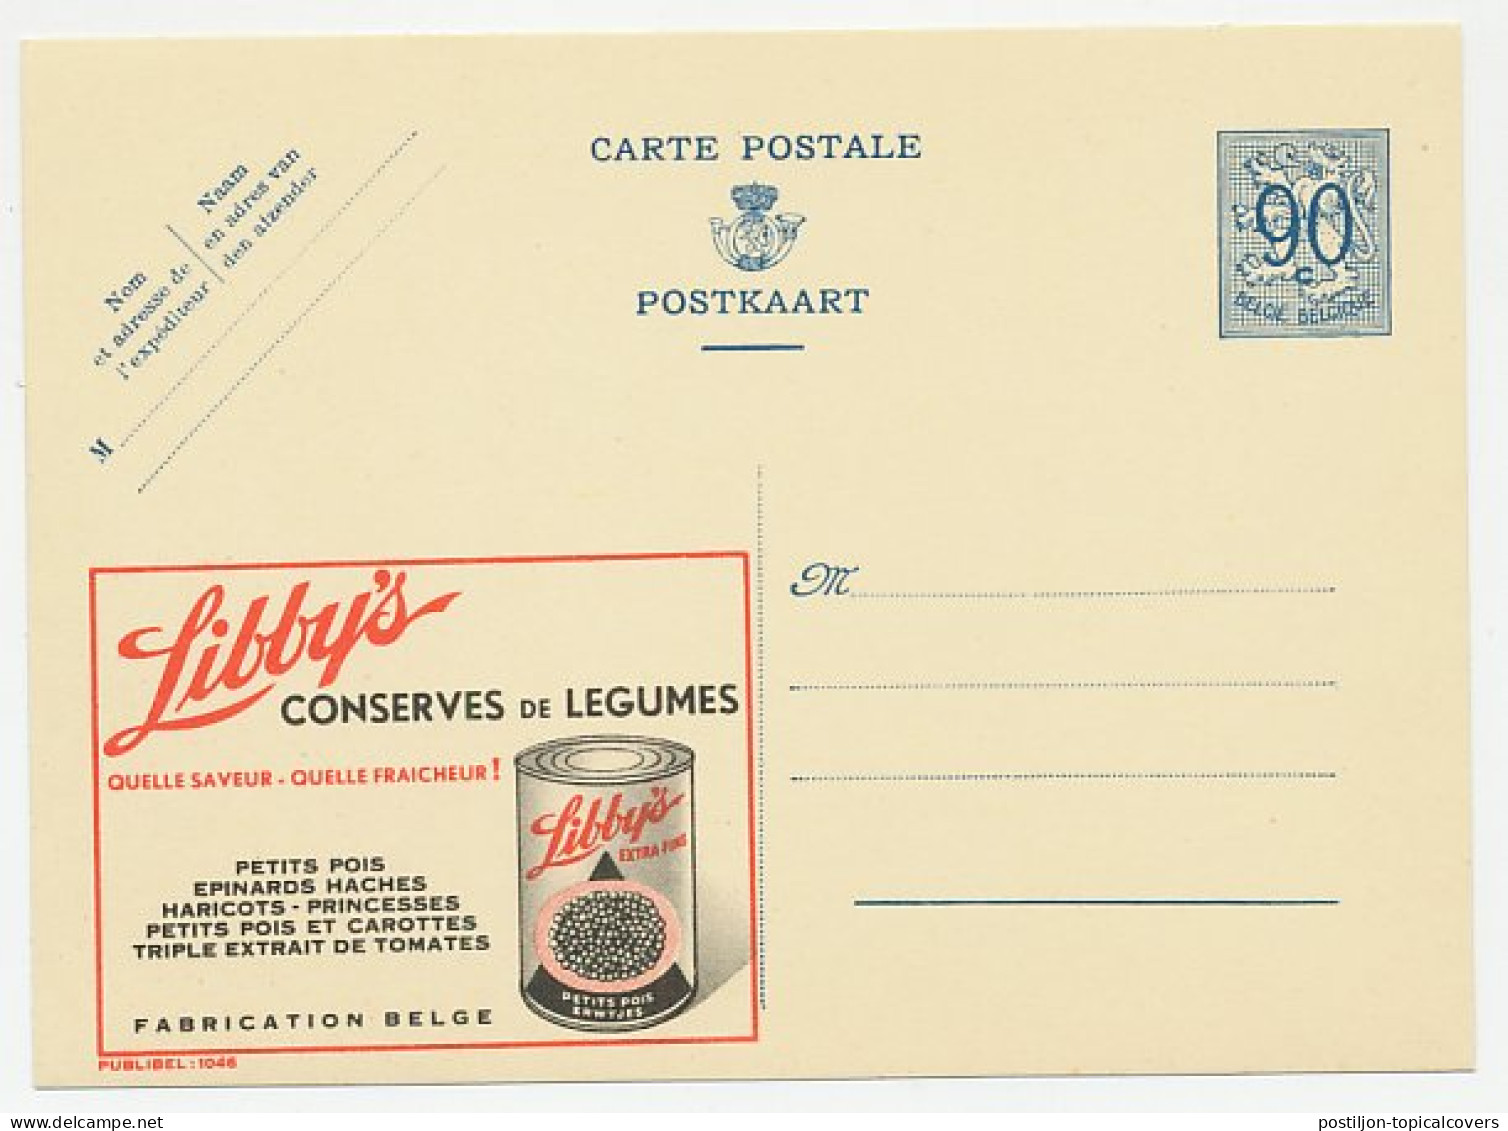 Publibel - Postal Stationery Belgium 1951 Canned Vegetables - Pea - Spinach - Beans - Carrots - Tomatoes - Vegetables